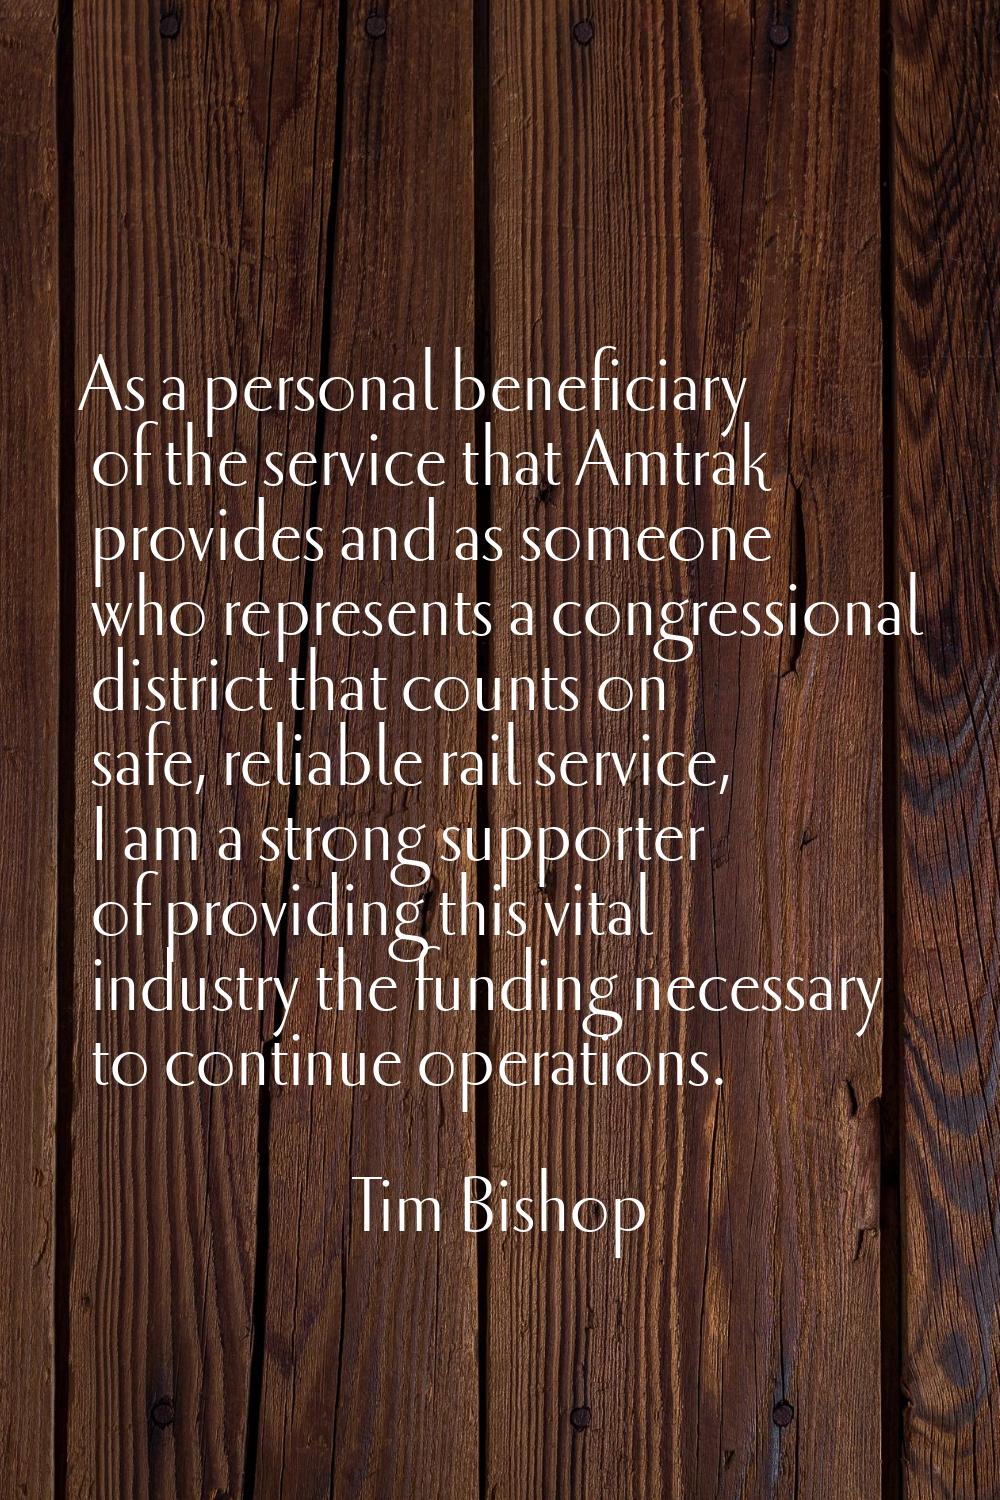 As a personal beneficiary of the service that Amtrak provides and as someone who represents a congr